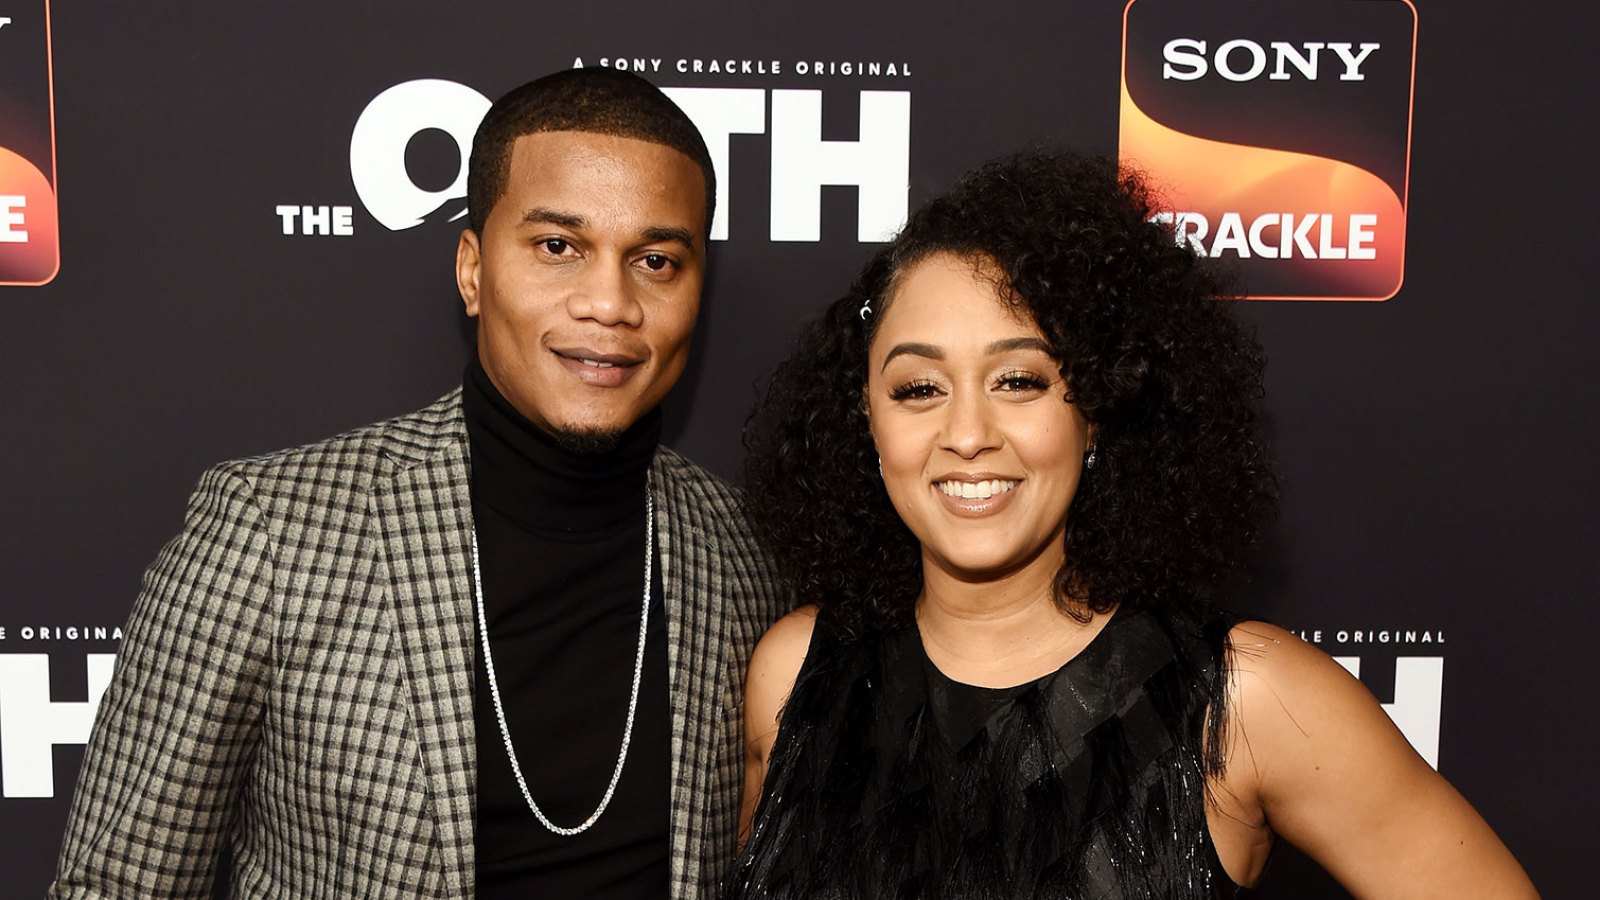 Tia Mowry and her Husband Cory Hardrict Don’t Have Plans for Baby No. 3: ‘Hell No’